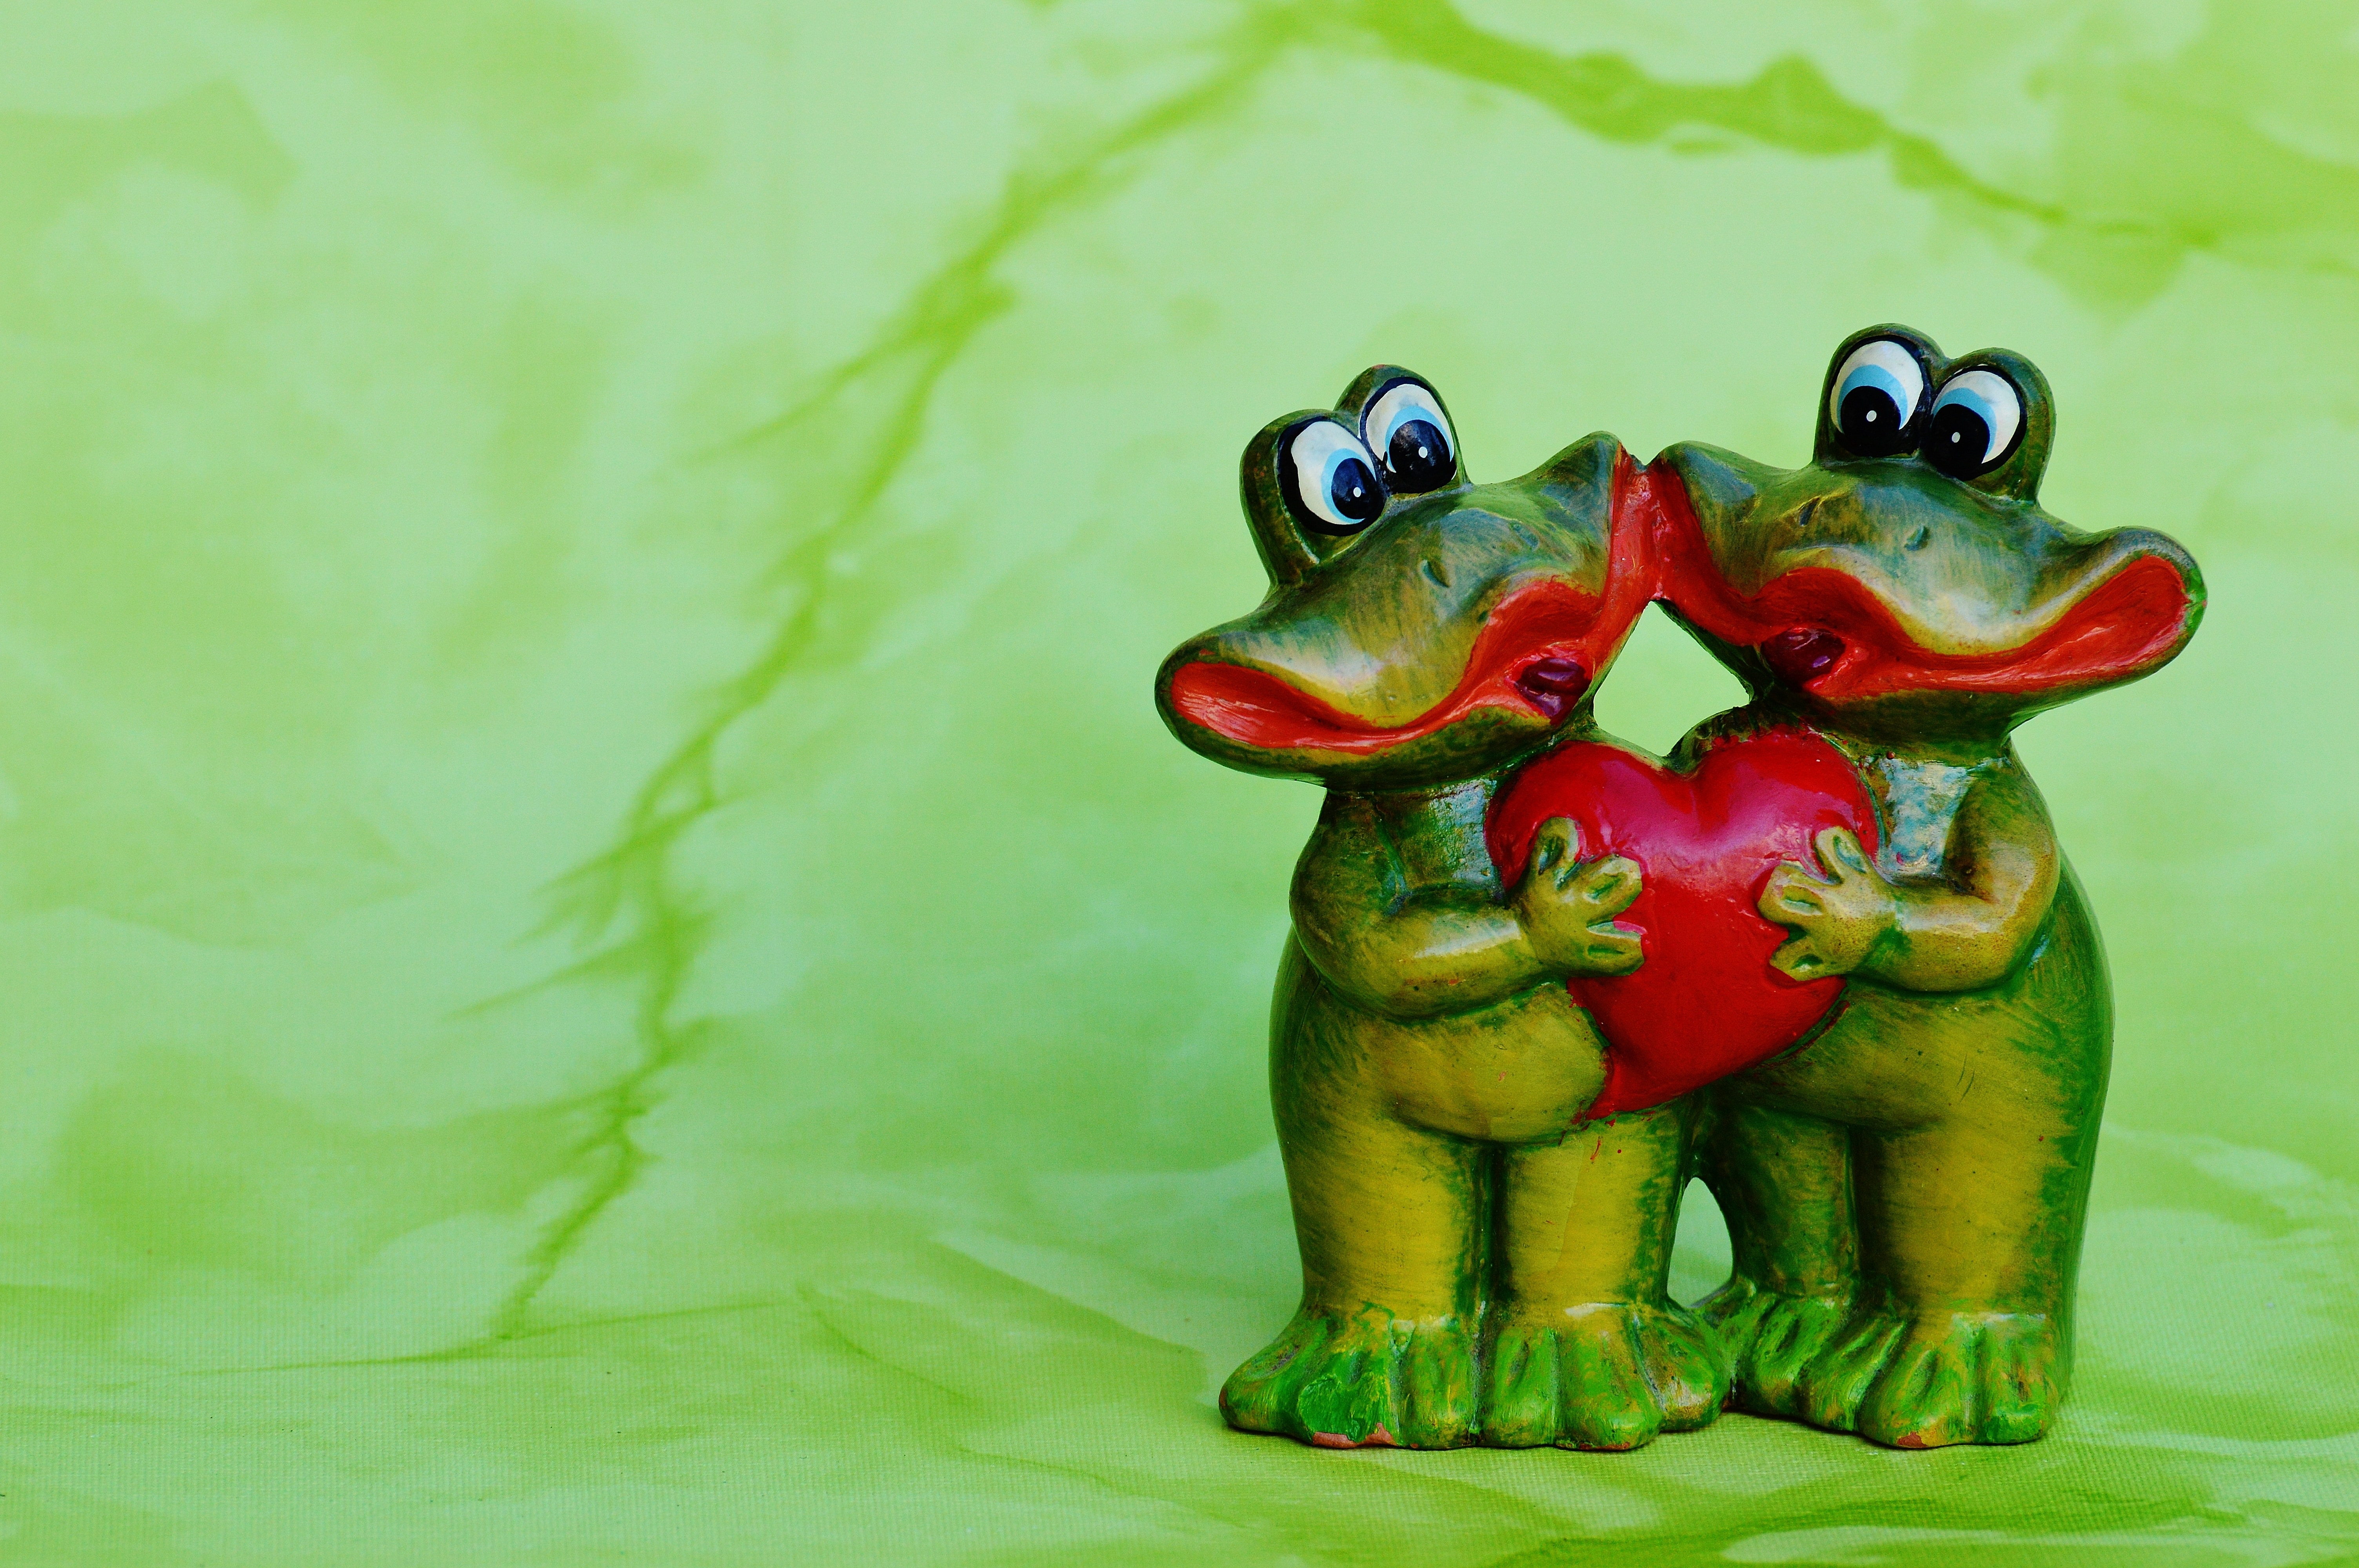 animals-for-adoption-28 love-heart-frogs-funny-pair-frog-wallpaper